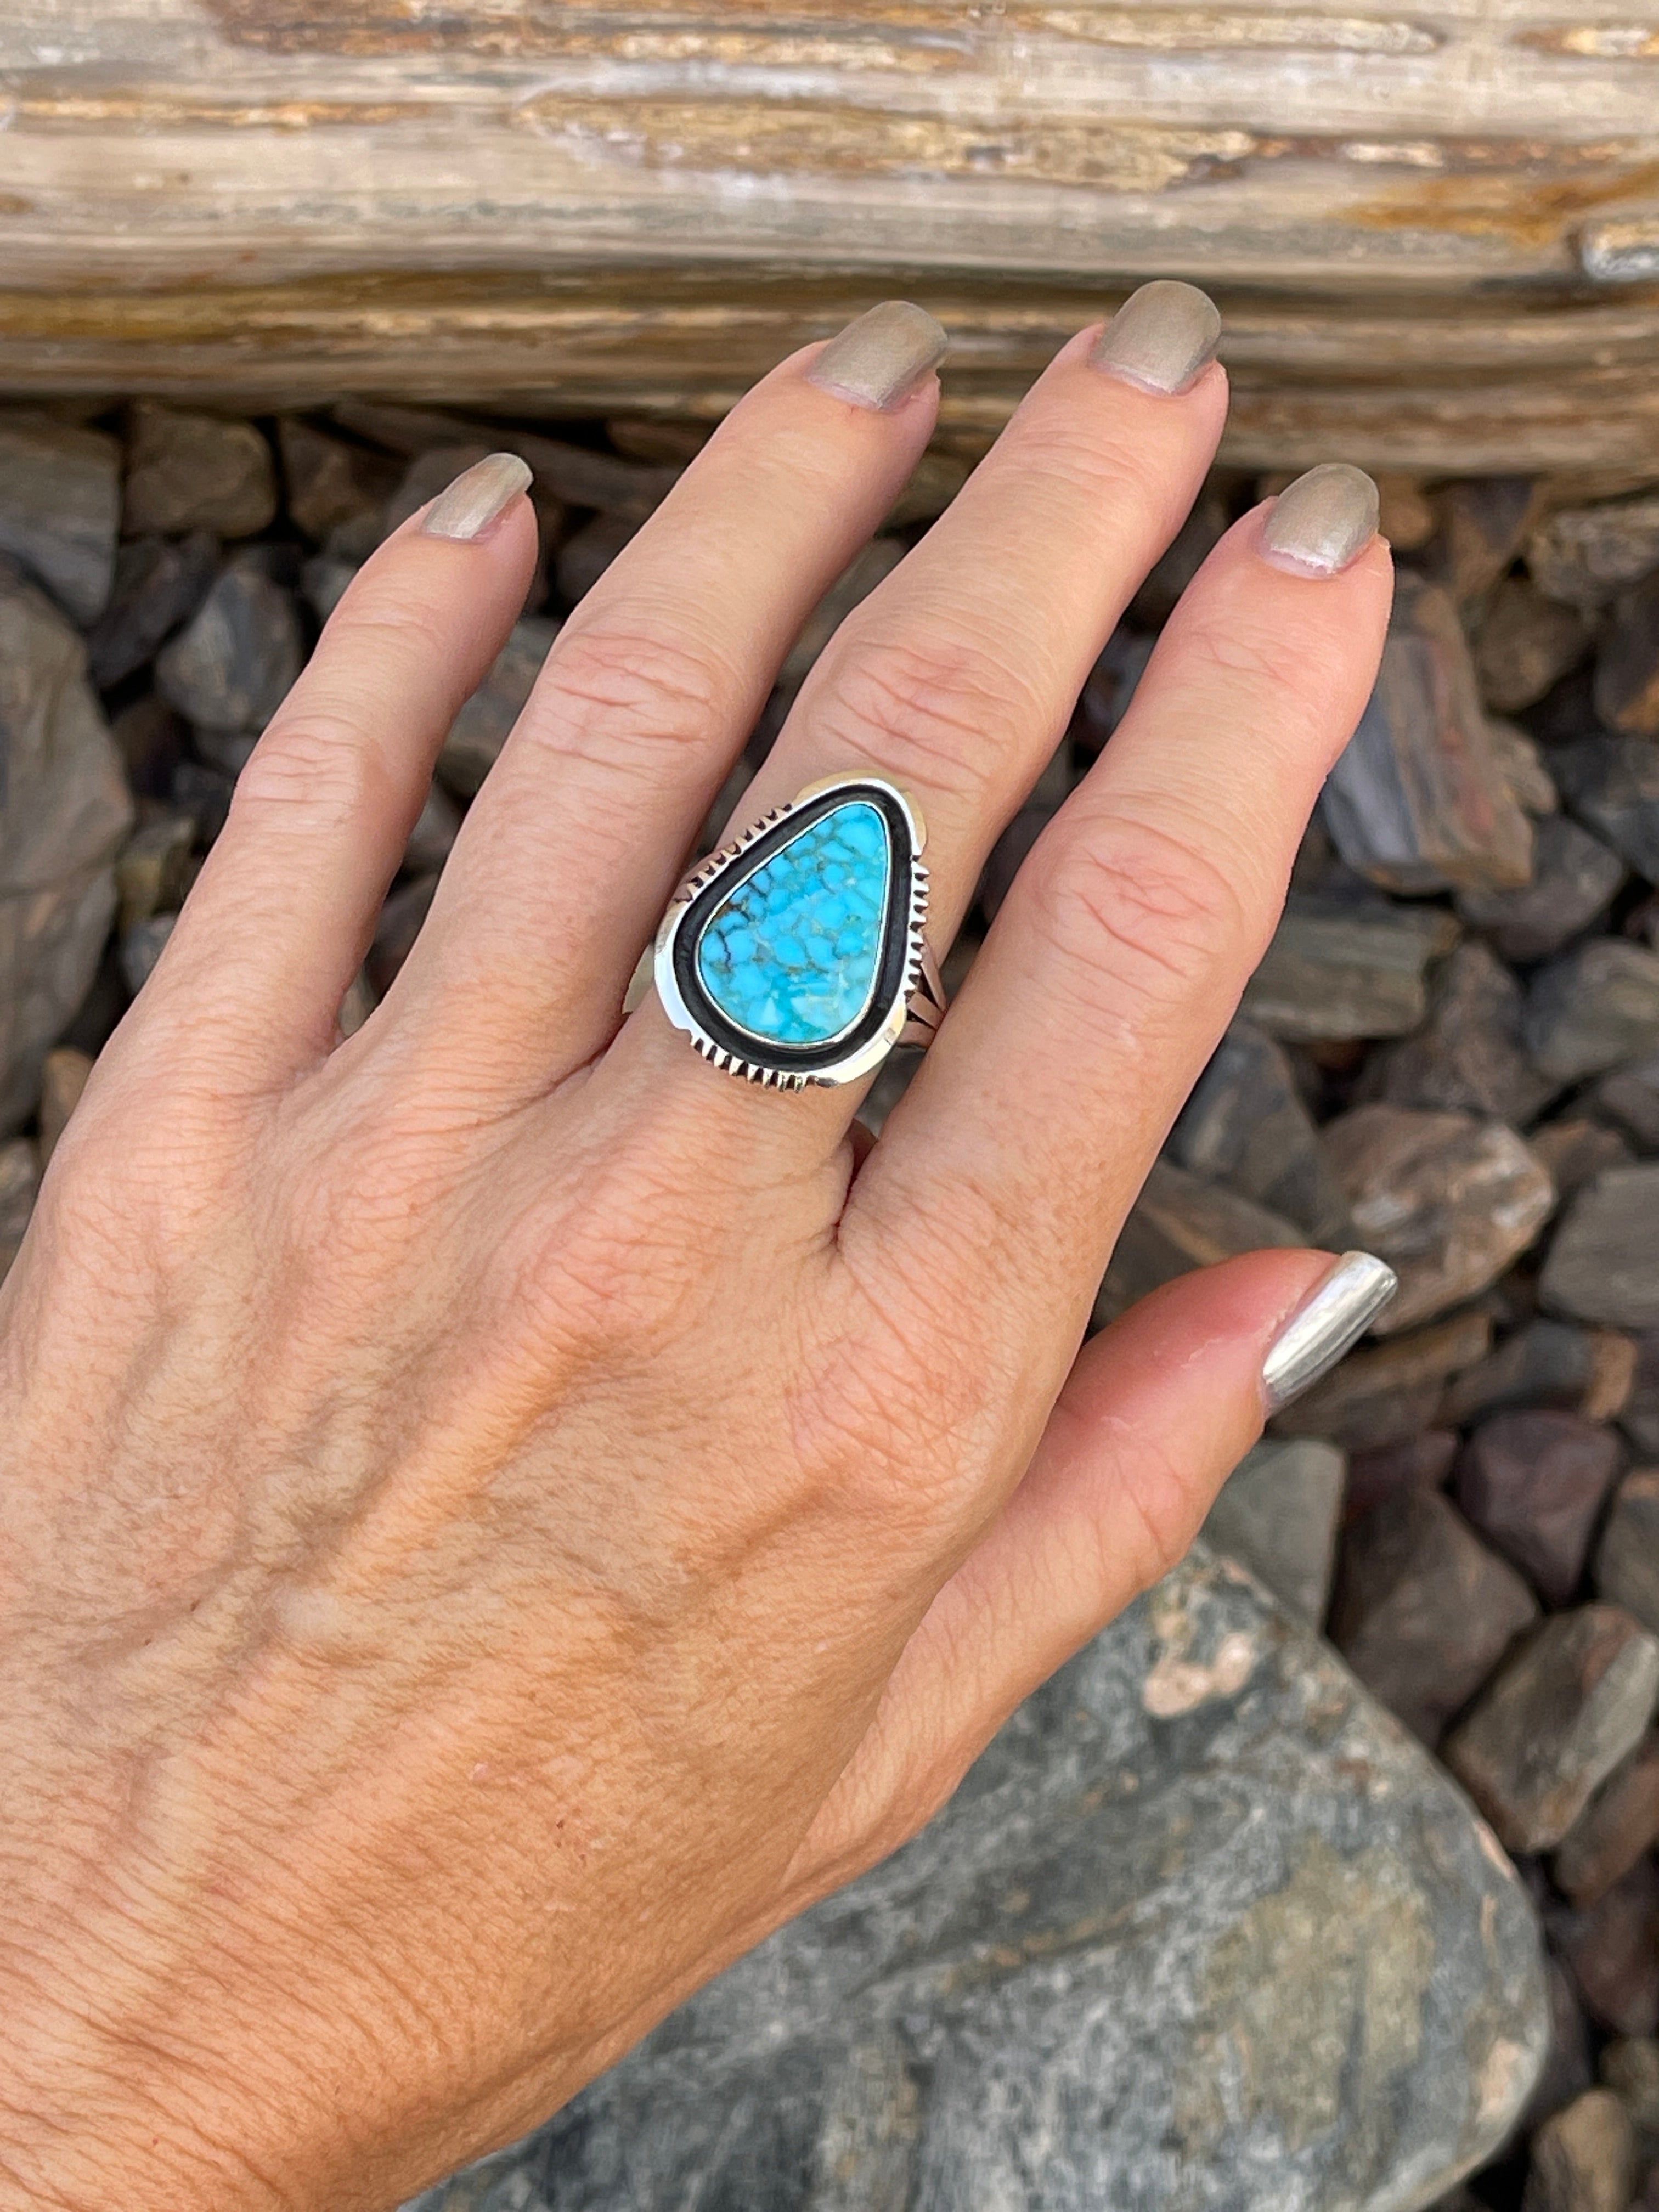 Handmade Solid Sterling Silver Turquoise Mountain Ring with Shadow Box Trim - Size 9 1/2